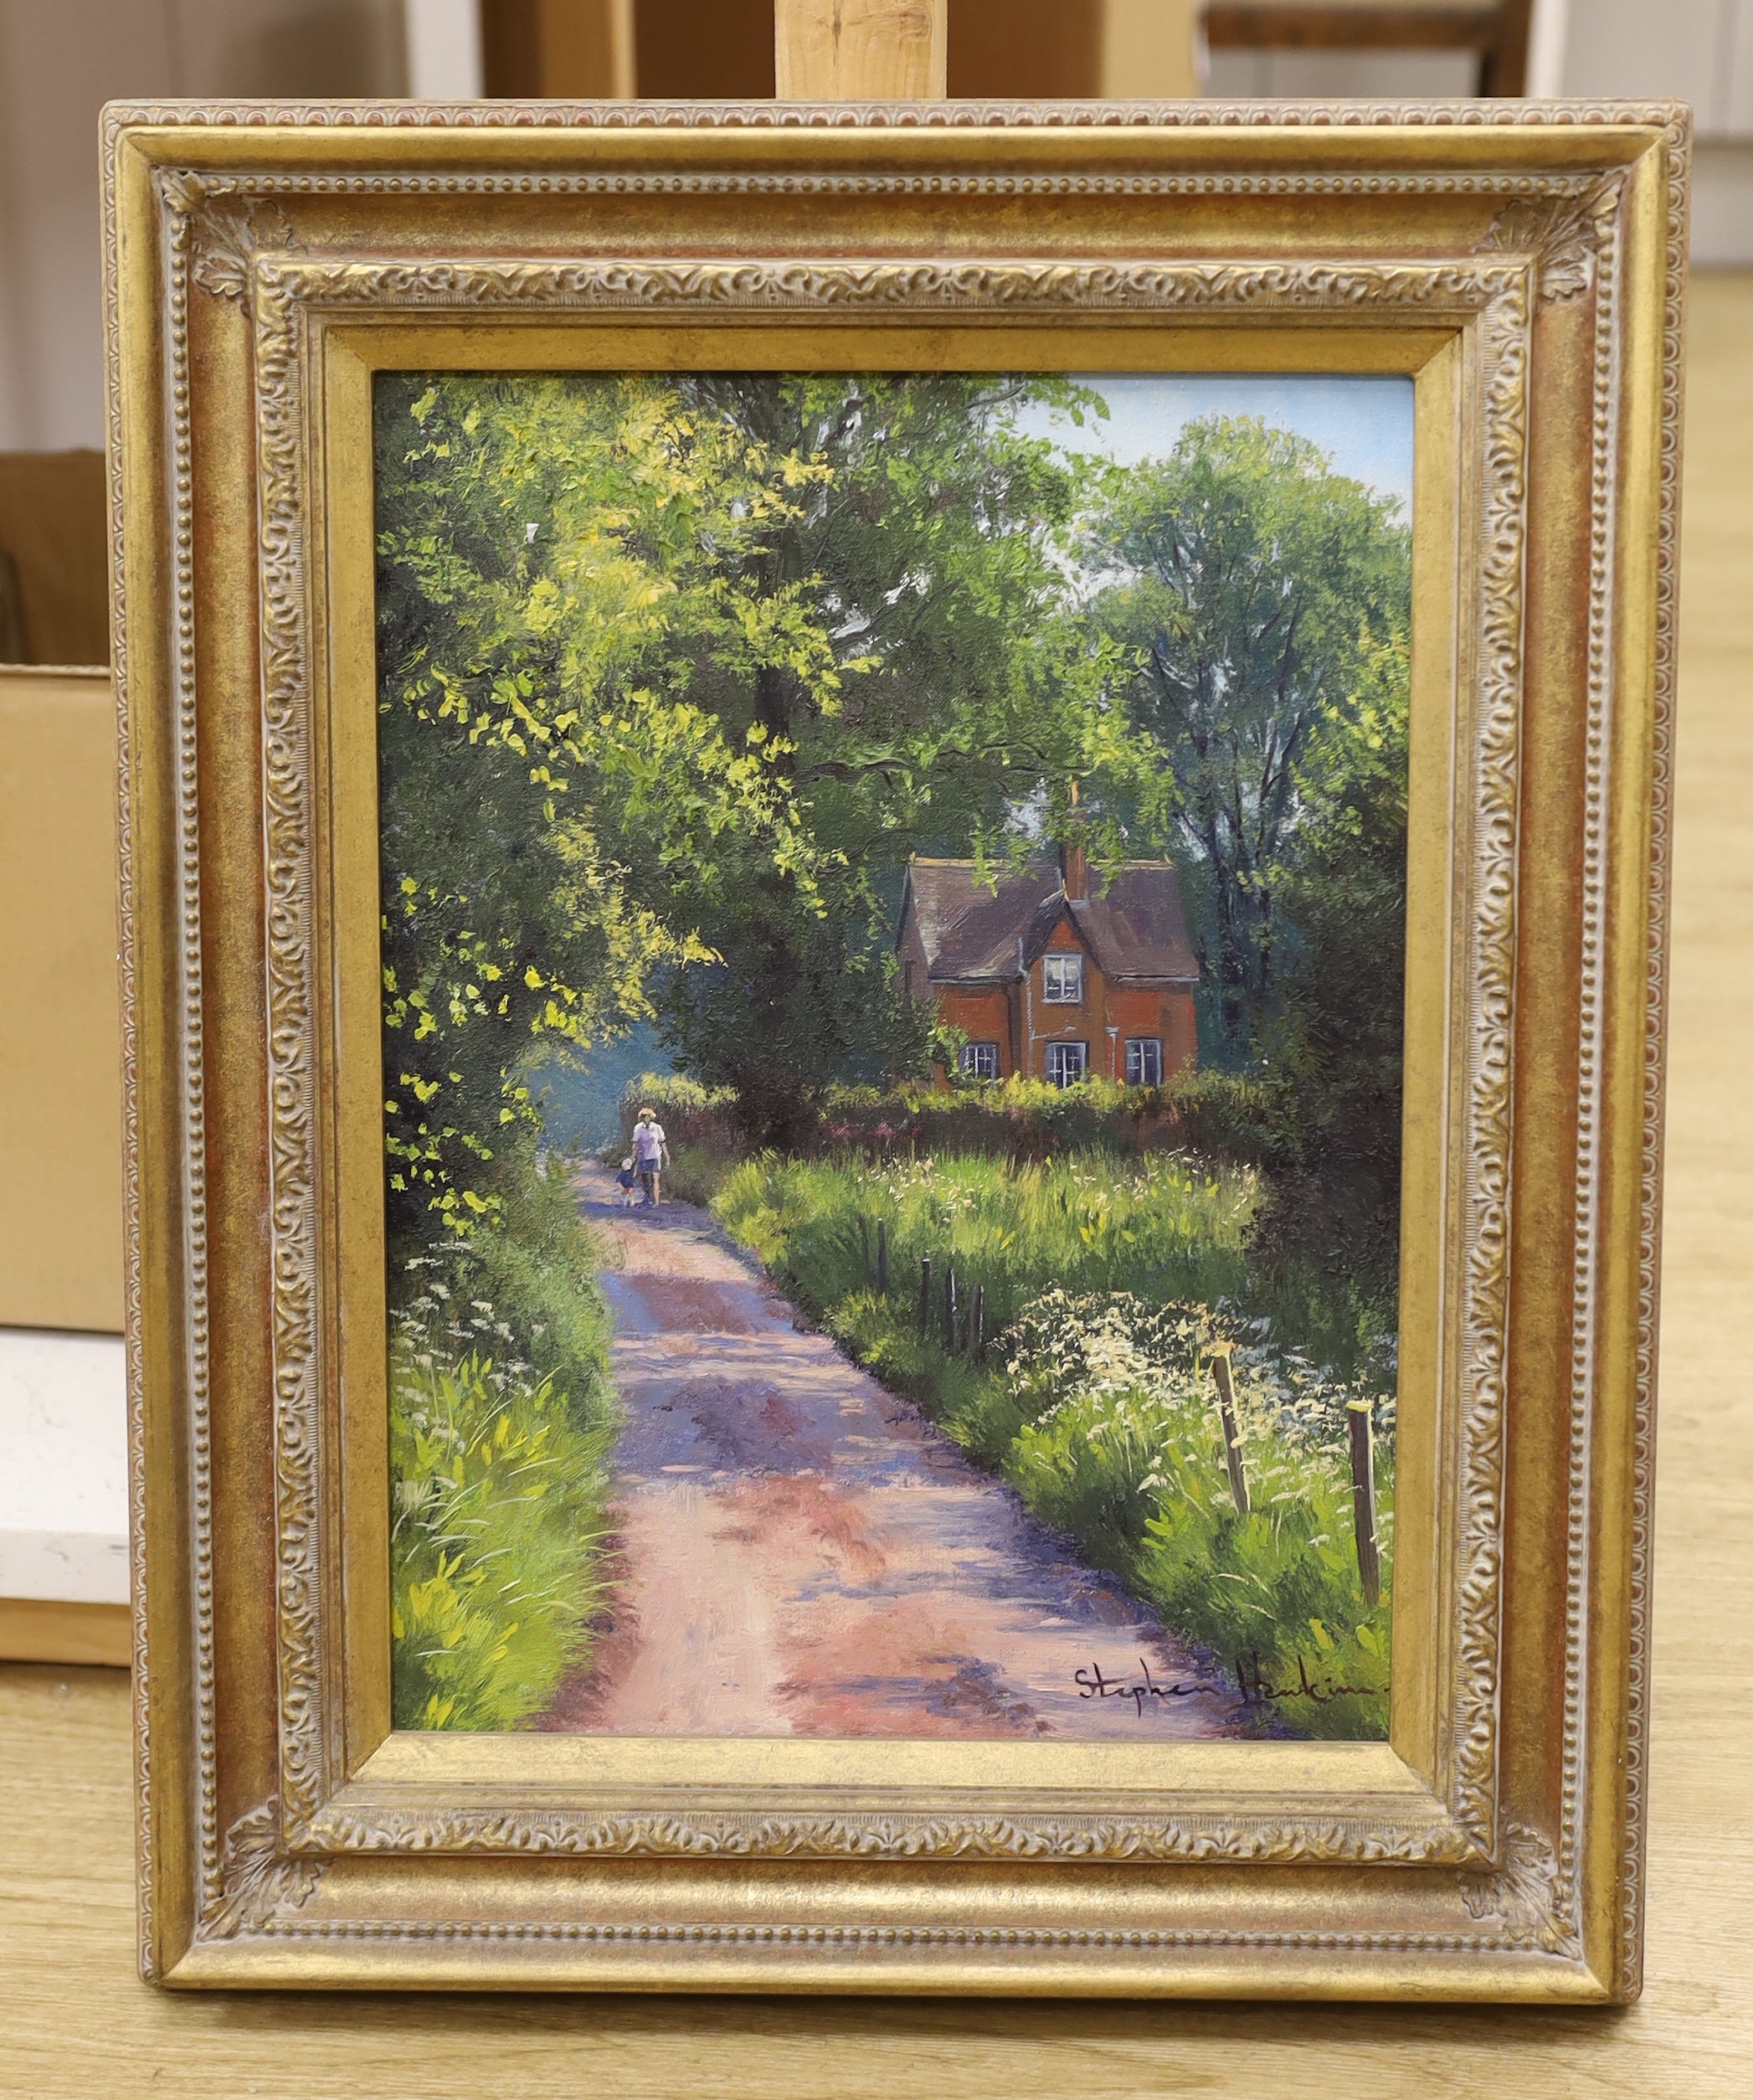 Stephen Hawkins (b.1964), oil on canvas, ‘Lane at Twineham’, signed, The Ashdown Gallery label verso, 39 x 29cm